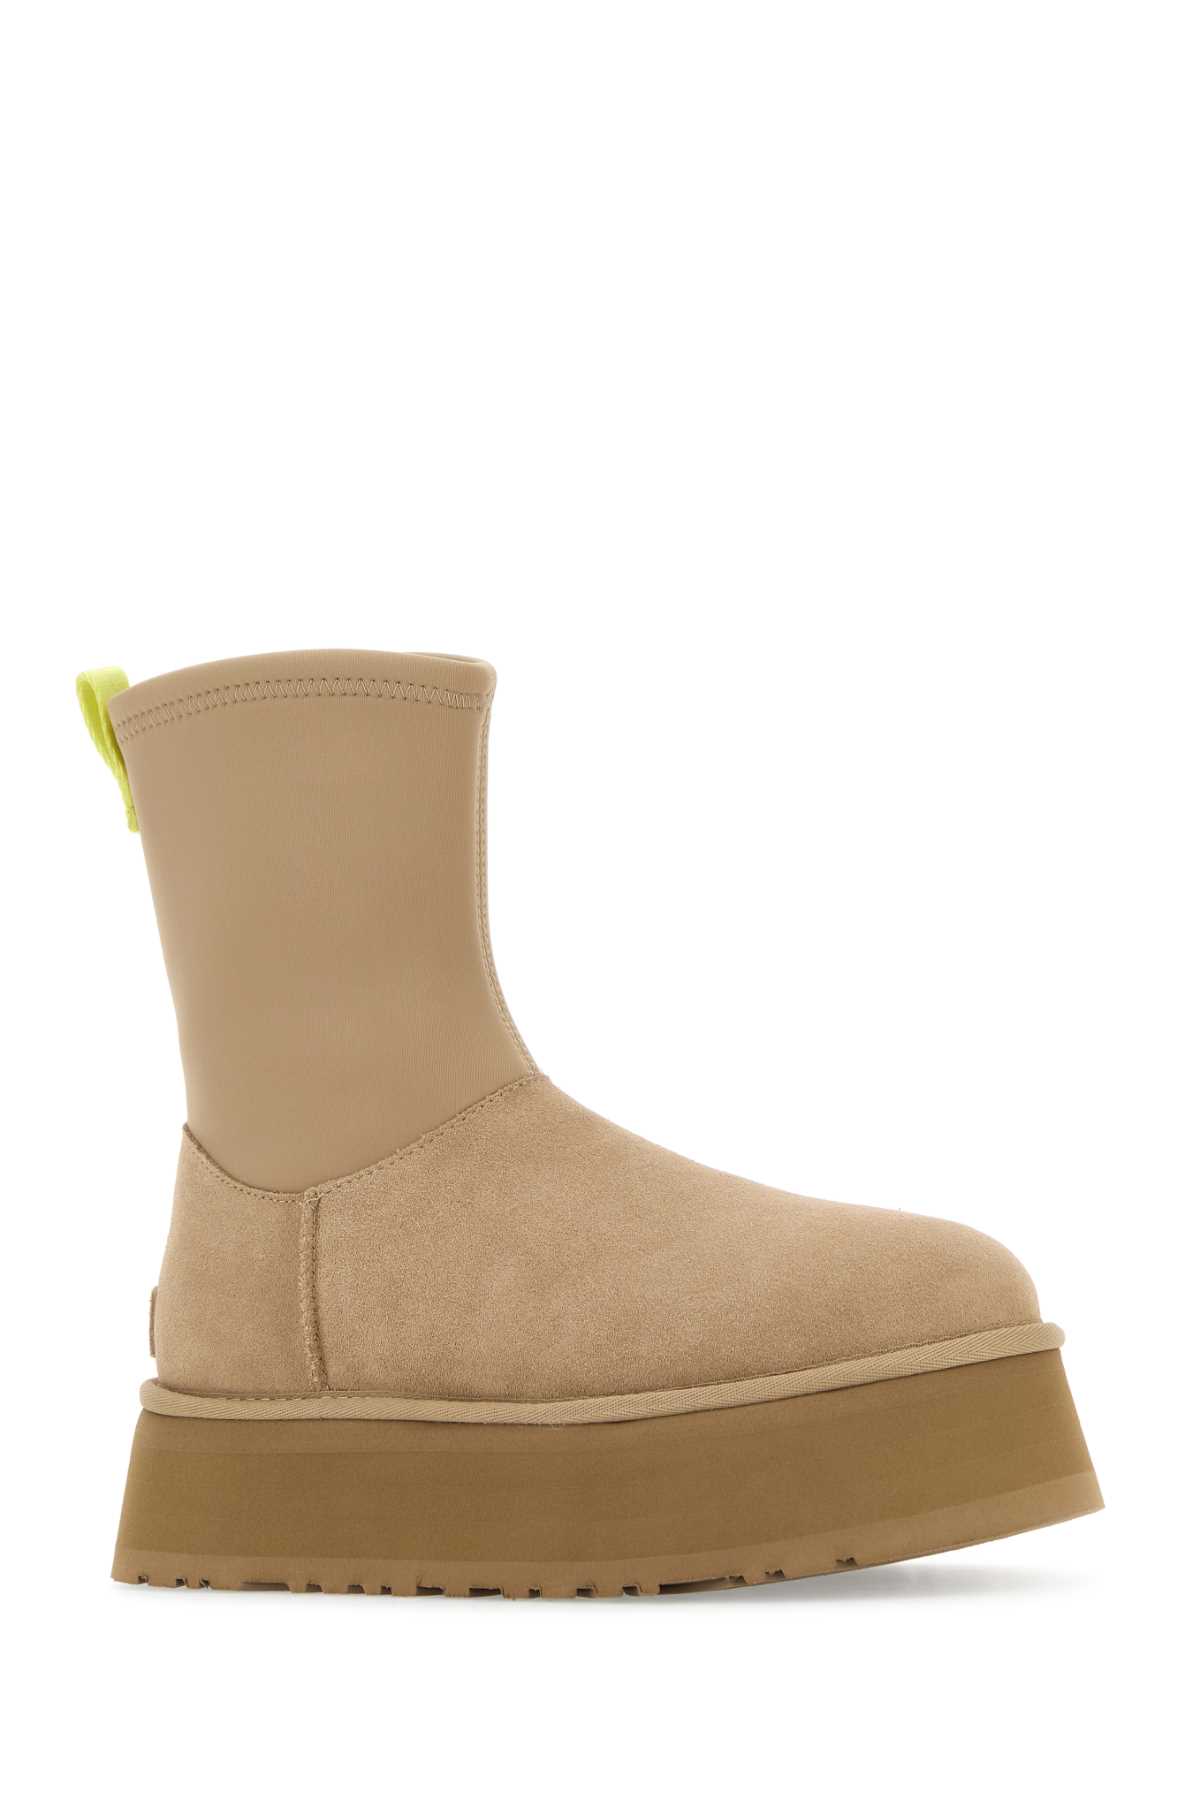 Ugg Sand Suede And Fabric Classic Dipper Ankle Boots